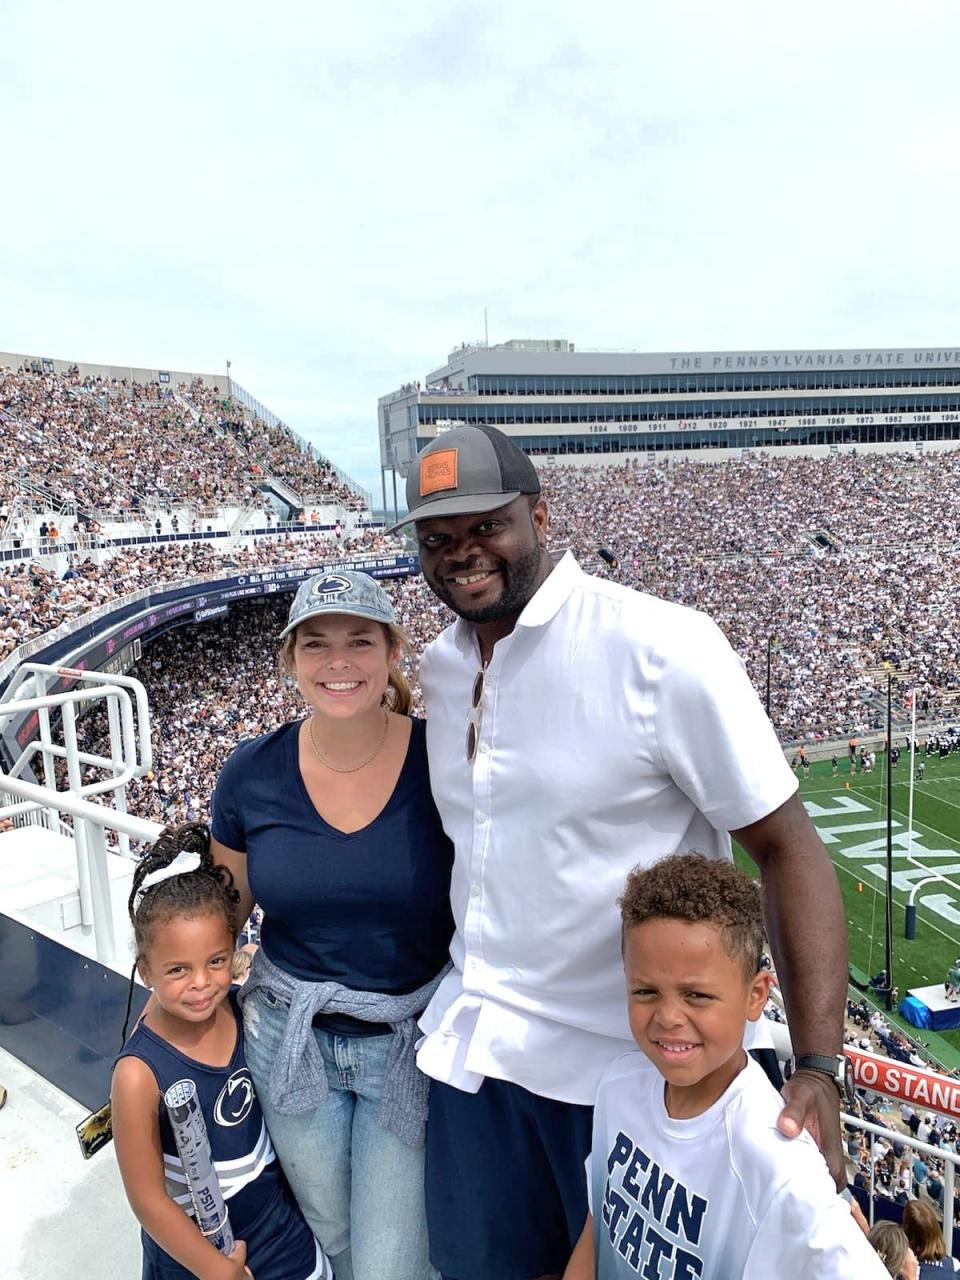 Former Penn State linebacker Bani Gbadyu attended the Nittany Lions' Sept. 10 home game vs. Ohio University with his wife, Molly, and their two oldest children, Trey, 6, (right) and Aspen, 4. Bani was diagnosed with pancreatic cancer a few weeks later.